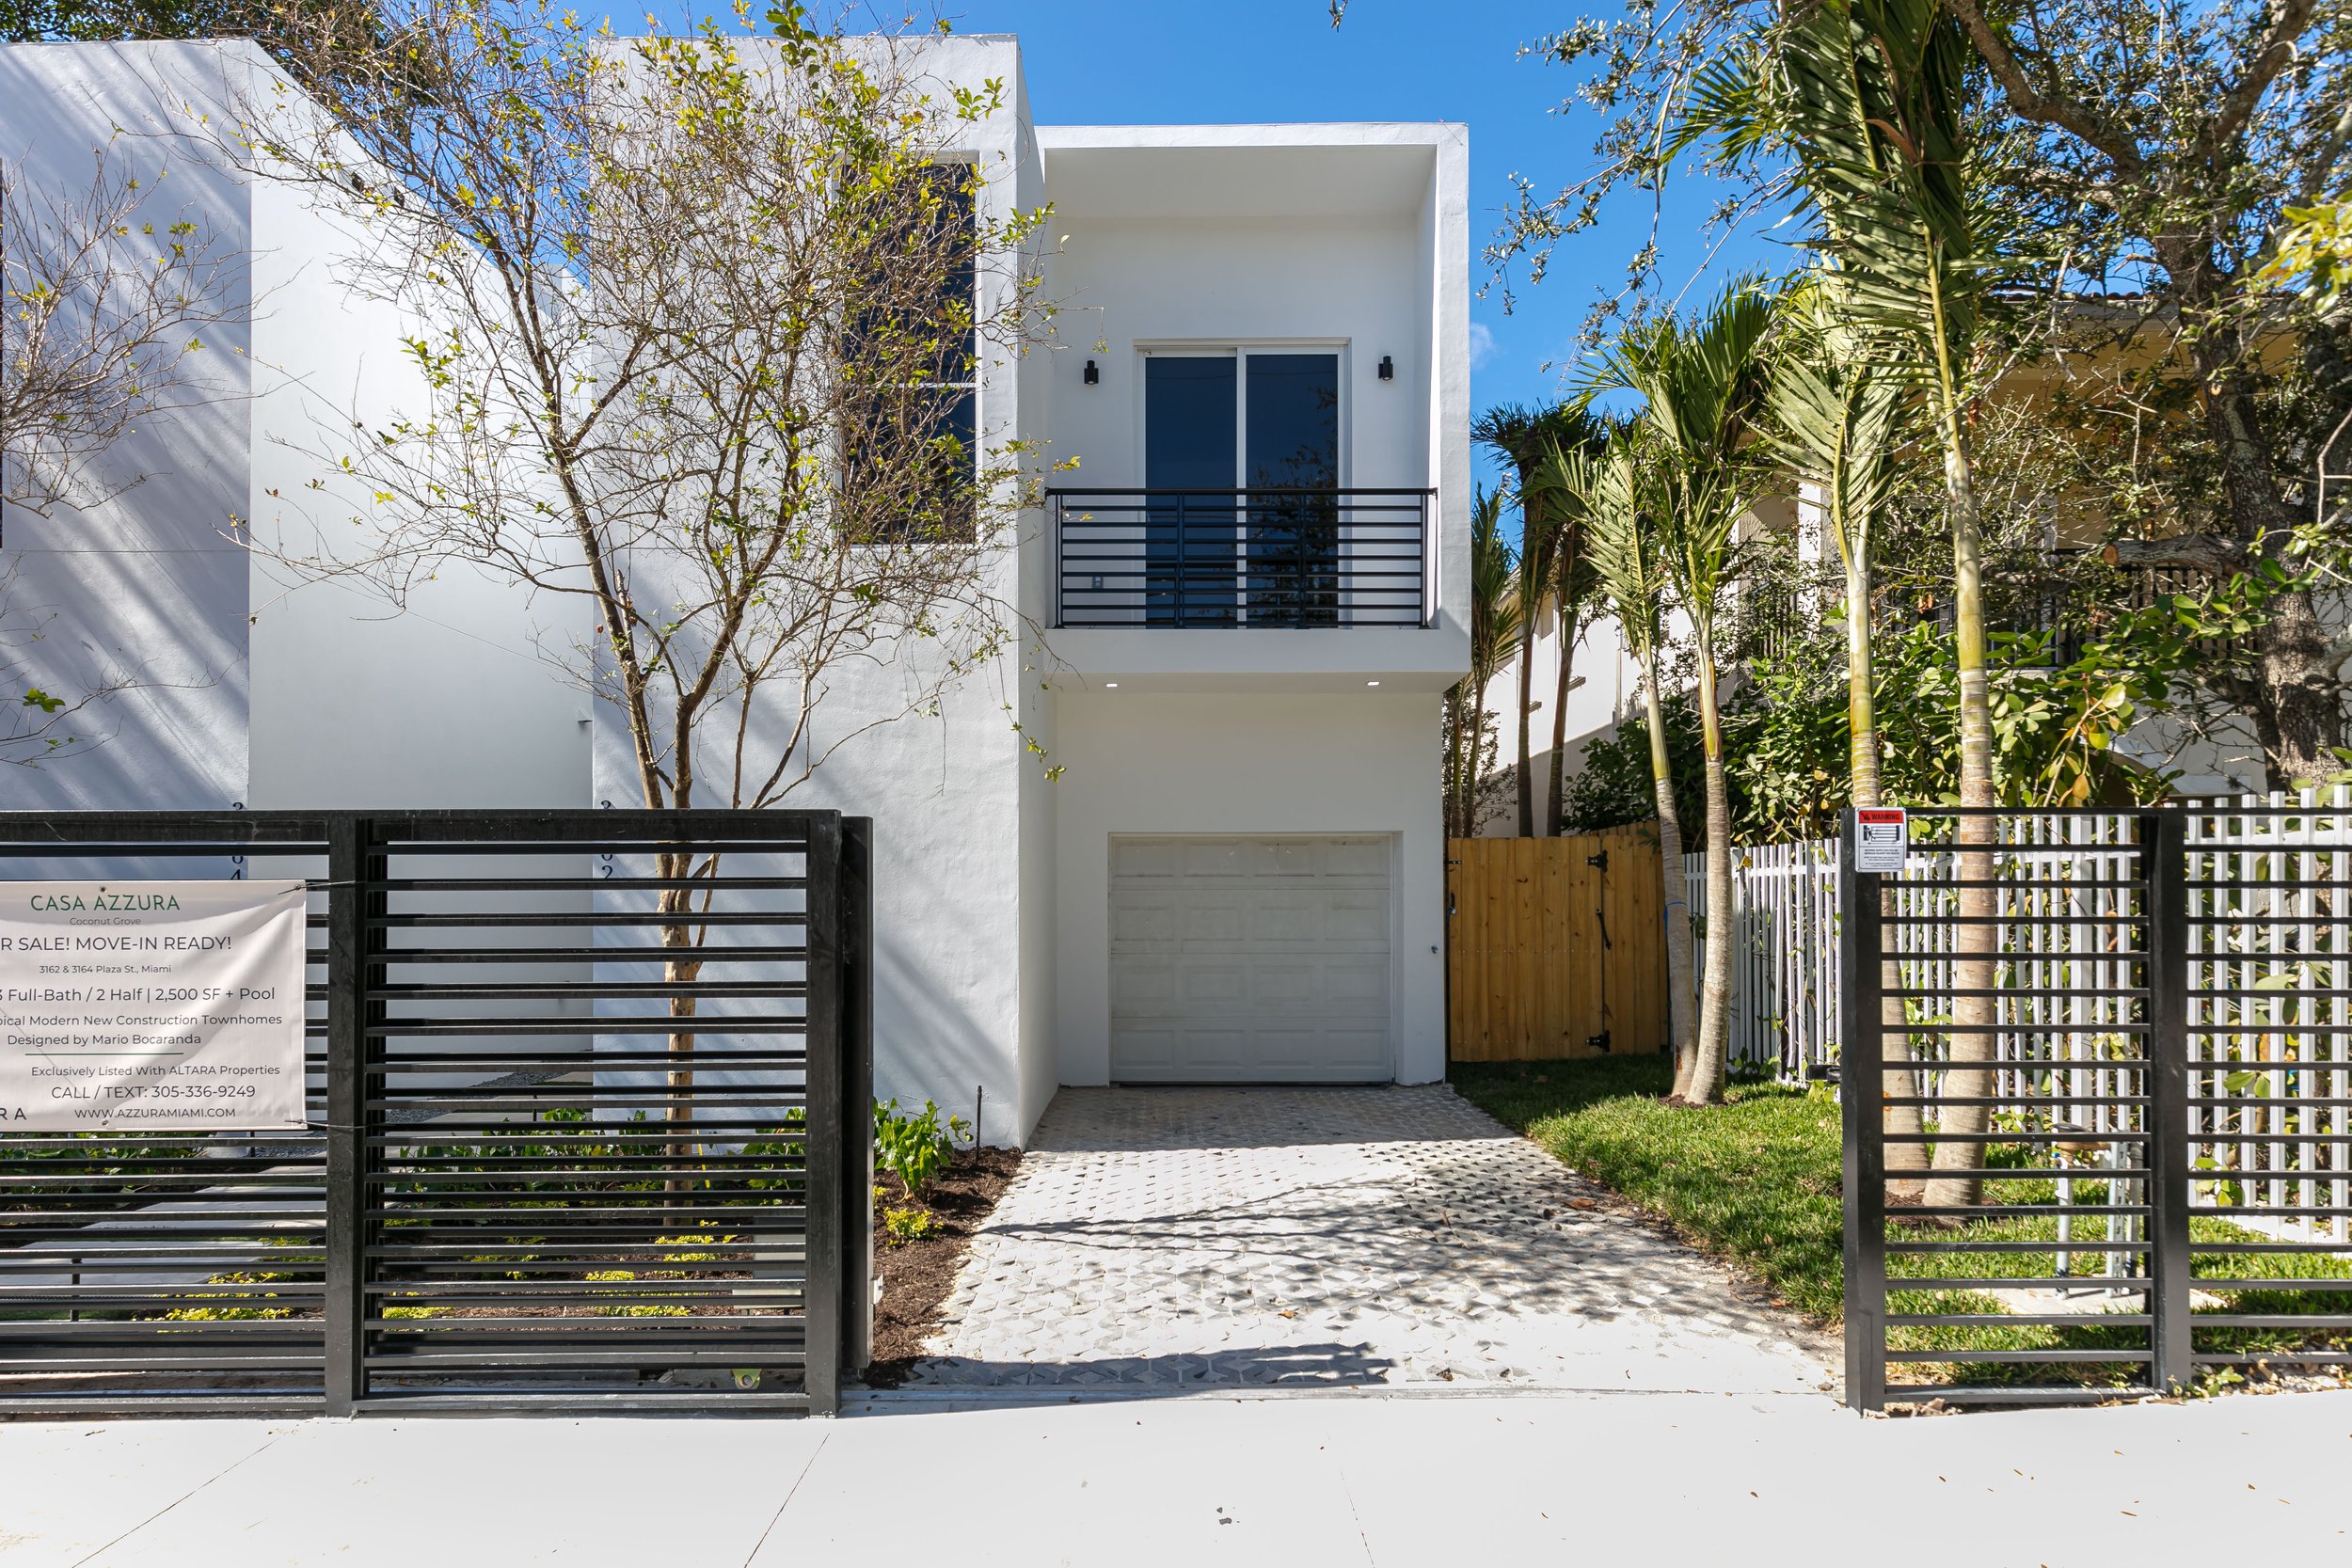 ALTARA Properties Launches Sales Of Newly Completed Casa Azzura Luxury Townhomes In Coconut Grove 50.jpg